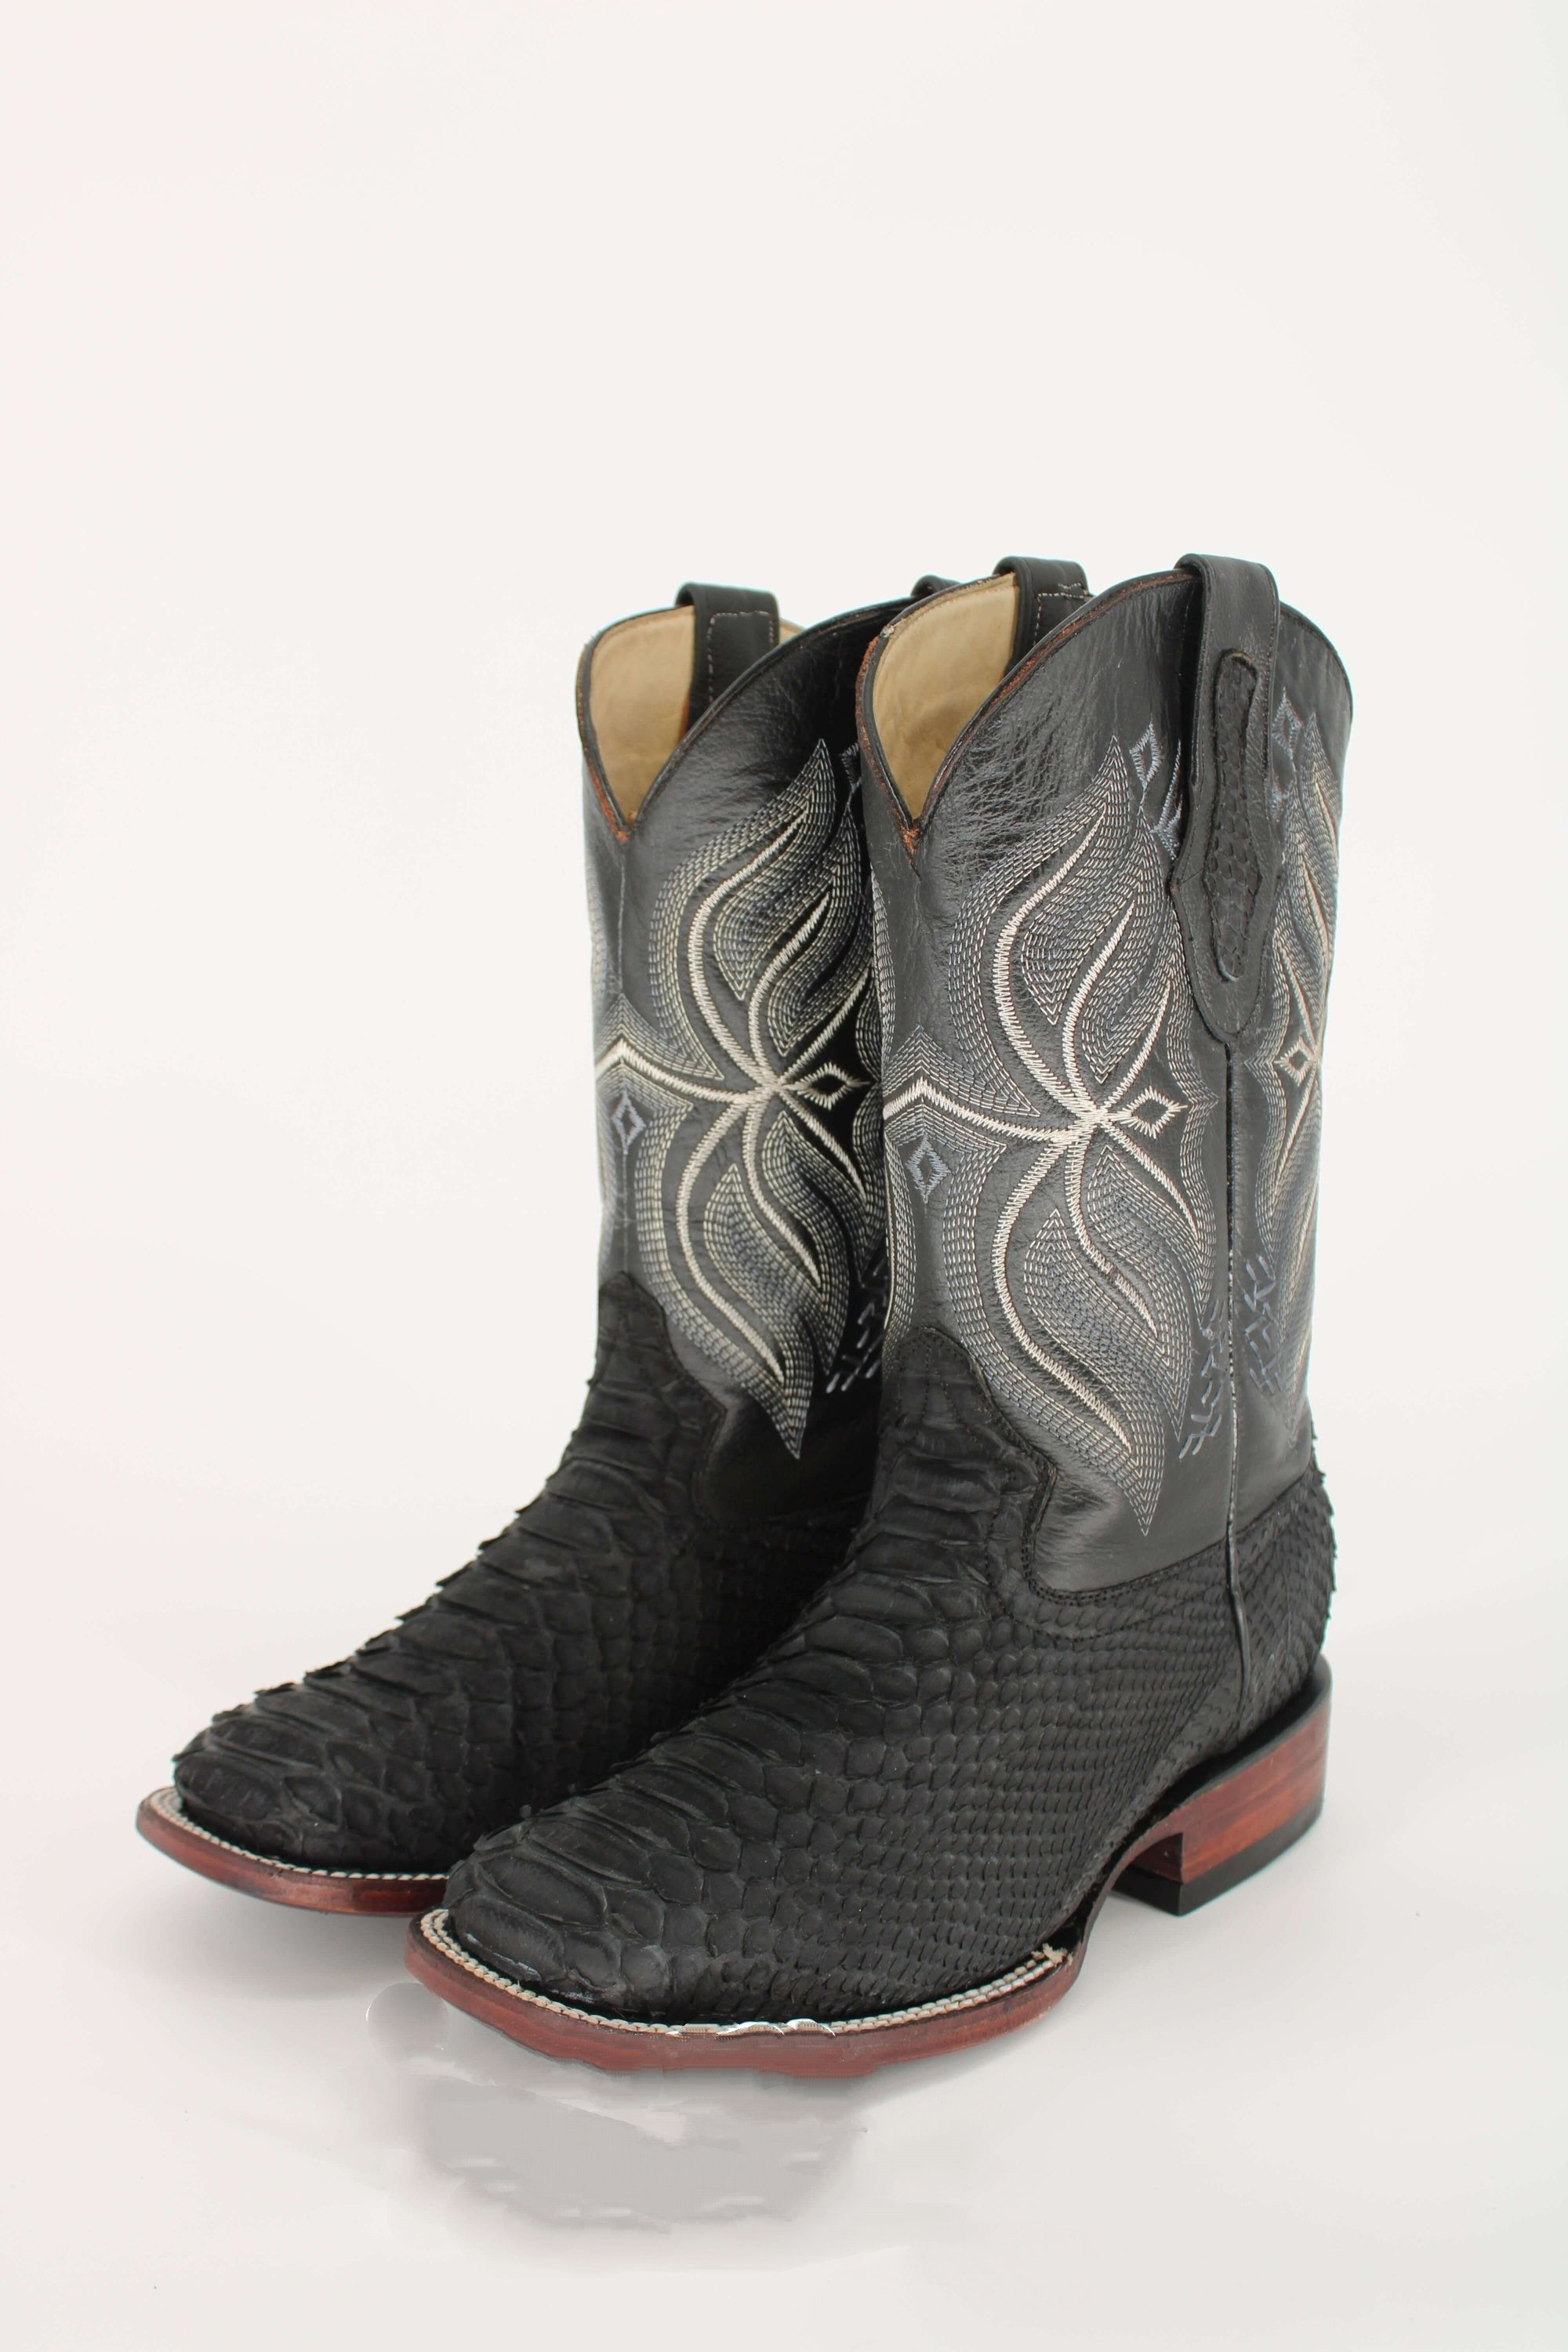 Men's Embroidery Cowboy Boots Vintage Western Boots-Free Shipping🔥